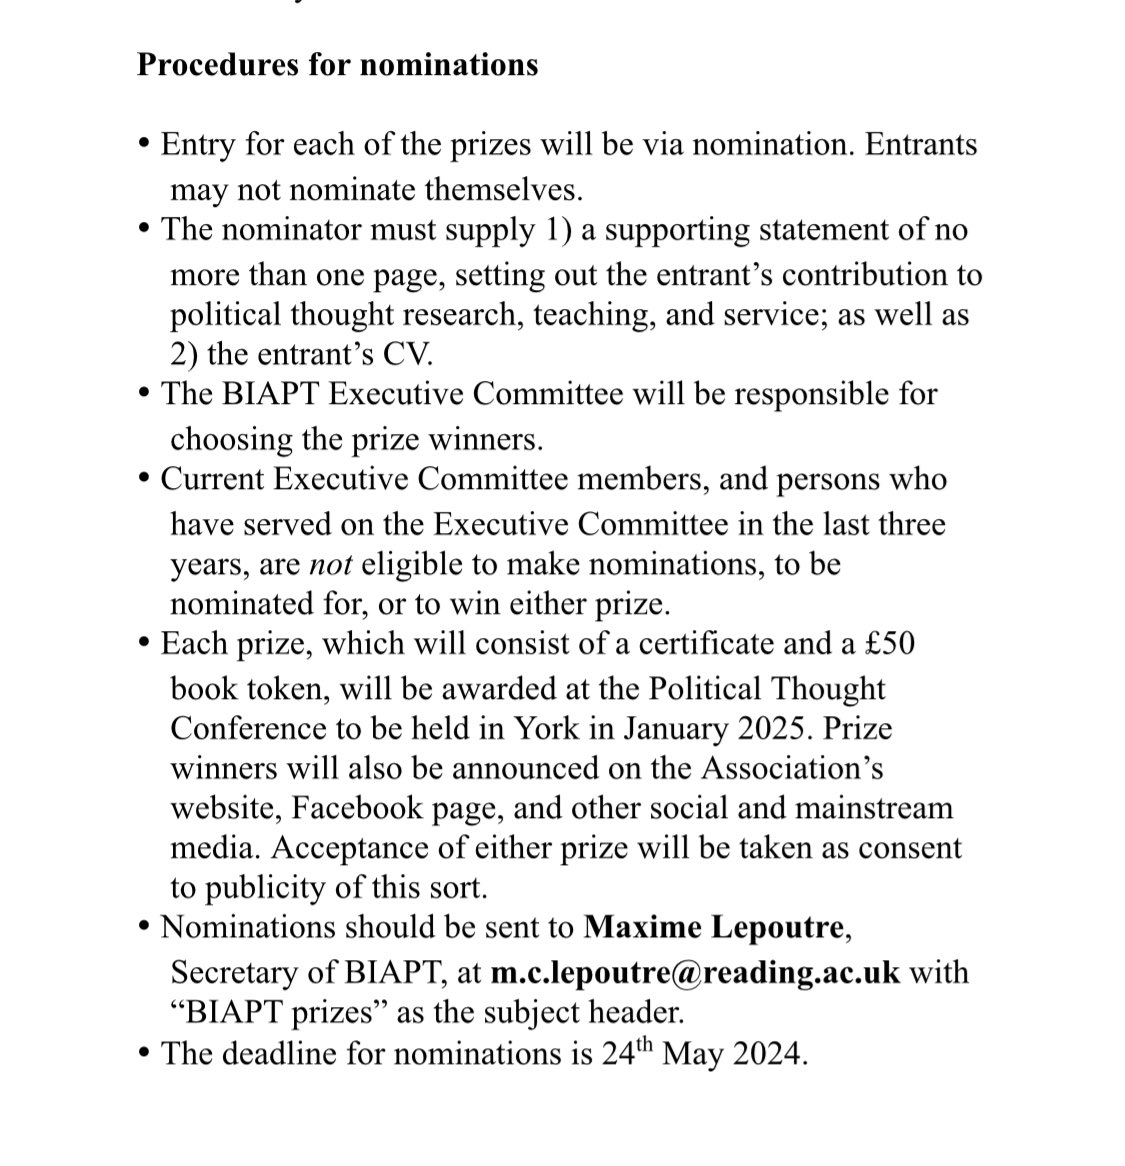 BIAPT is pleased to announce that nominations for its early and mid-career prizes are now open. The deadline is May 24th. Details of the criteria and the procedure for nominating are below 👇